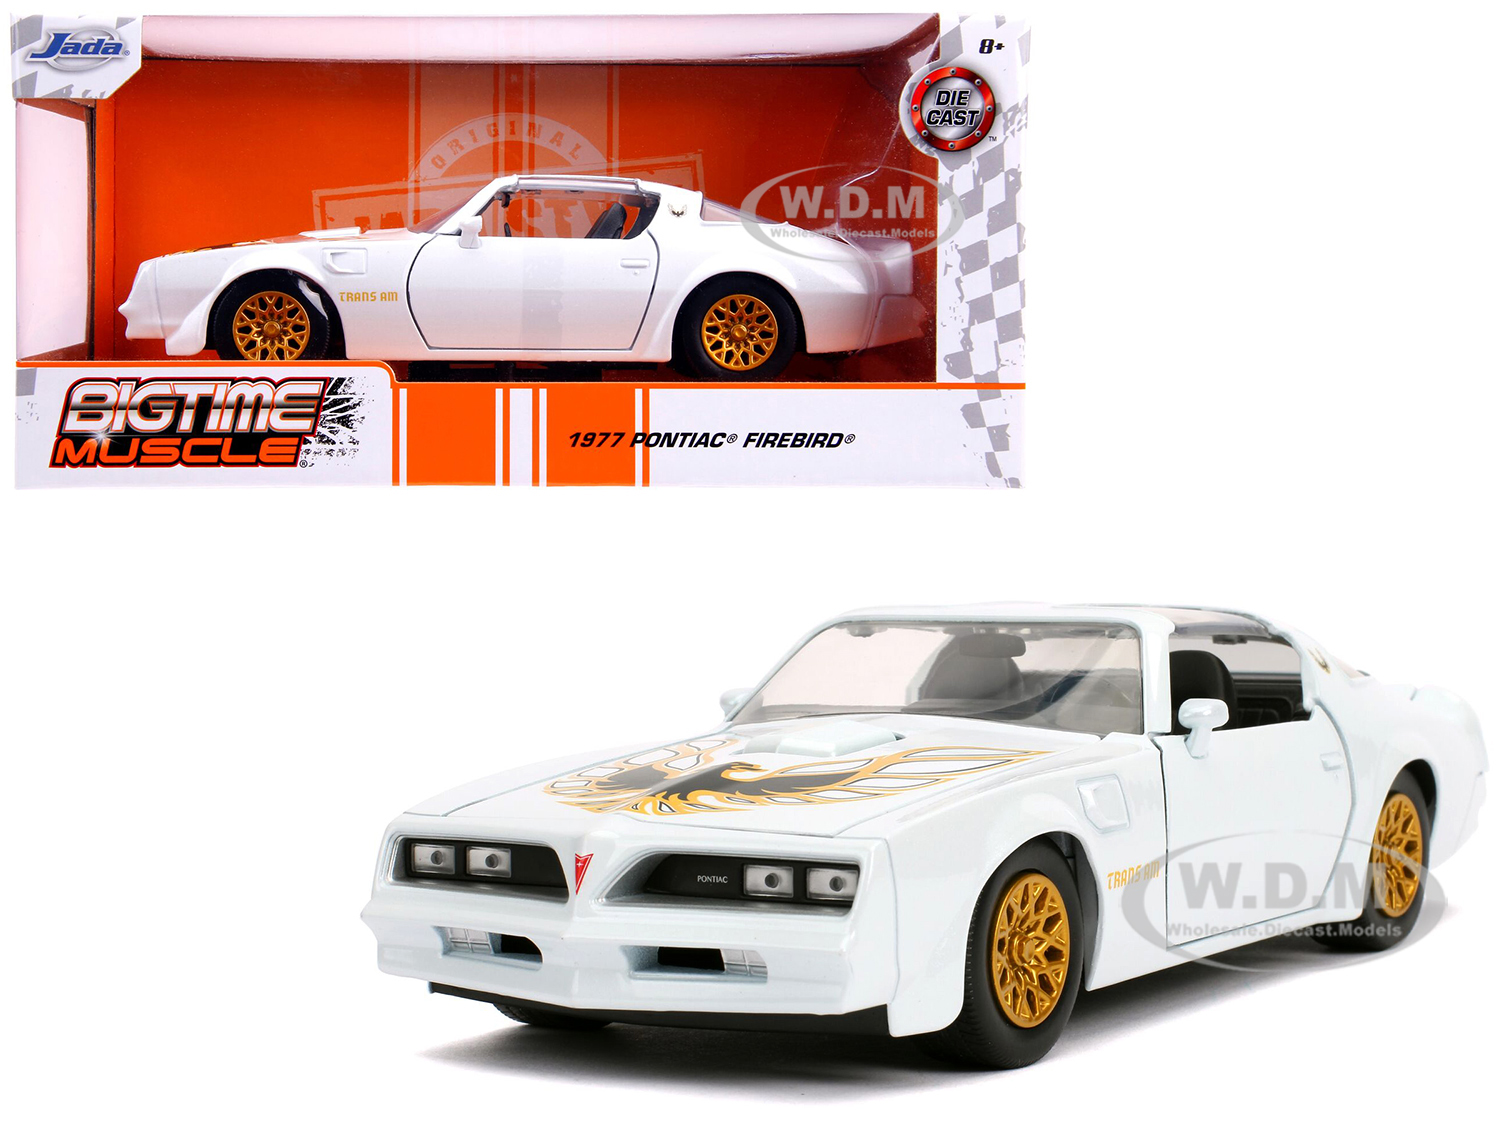 1977 Pontiac Firebird Trans Am Pearl White With Gold Wheels "bigtime Muscle" 1/24 Diecast Model Car By Jada